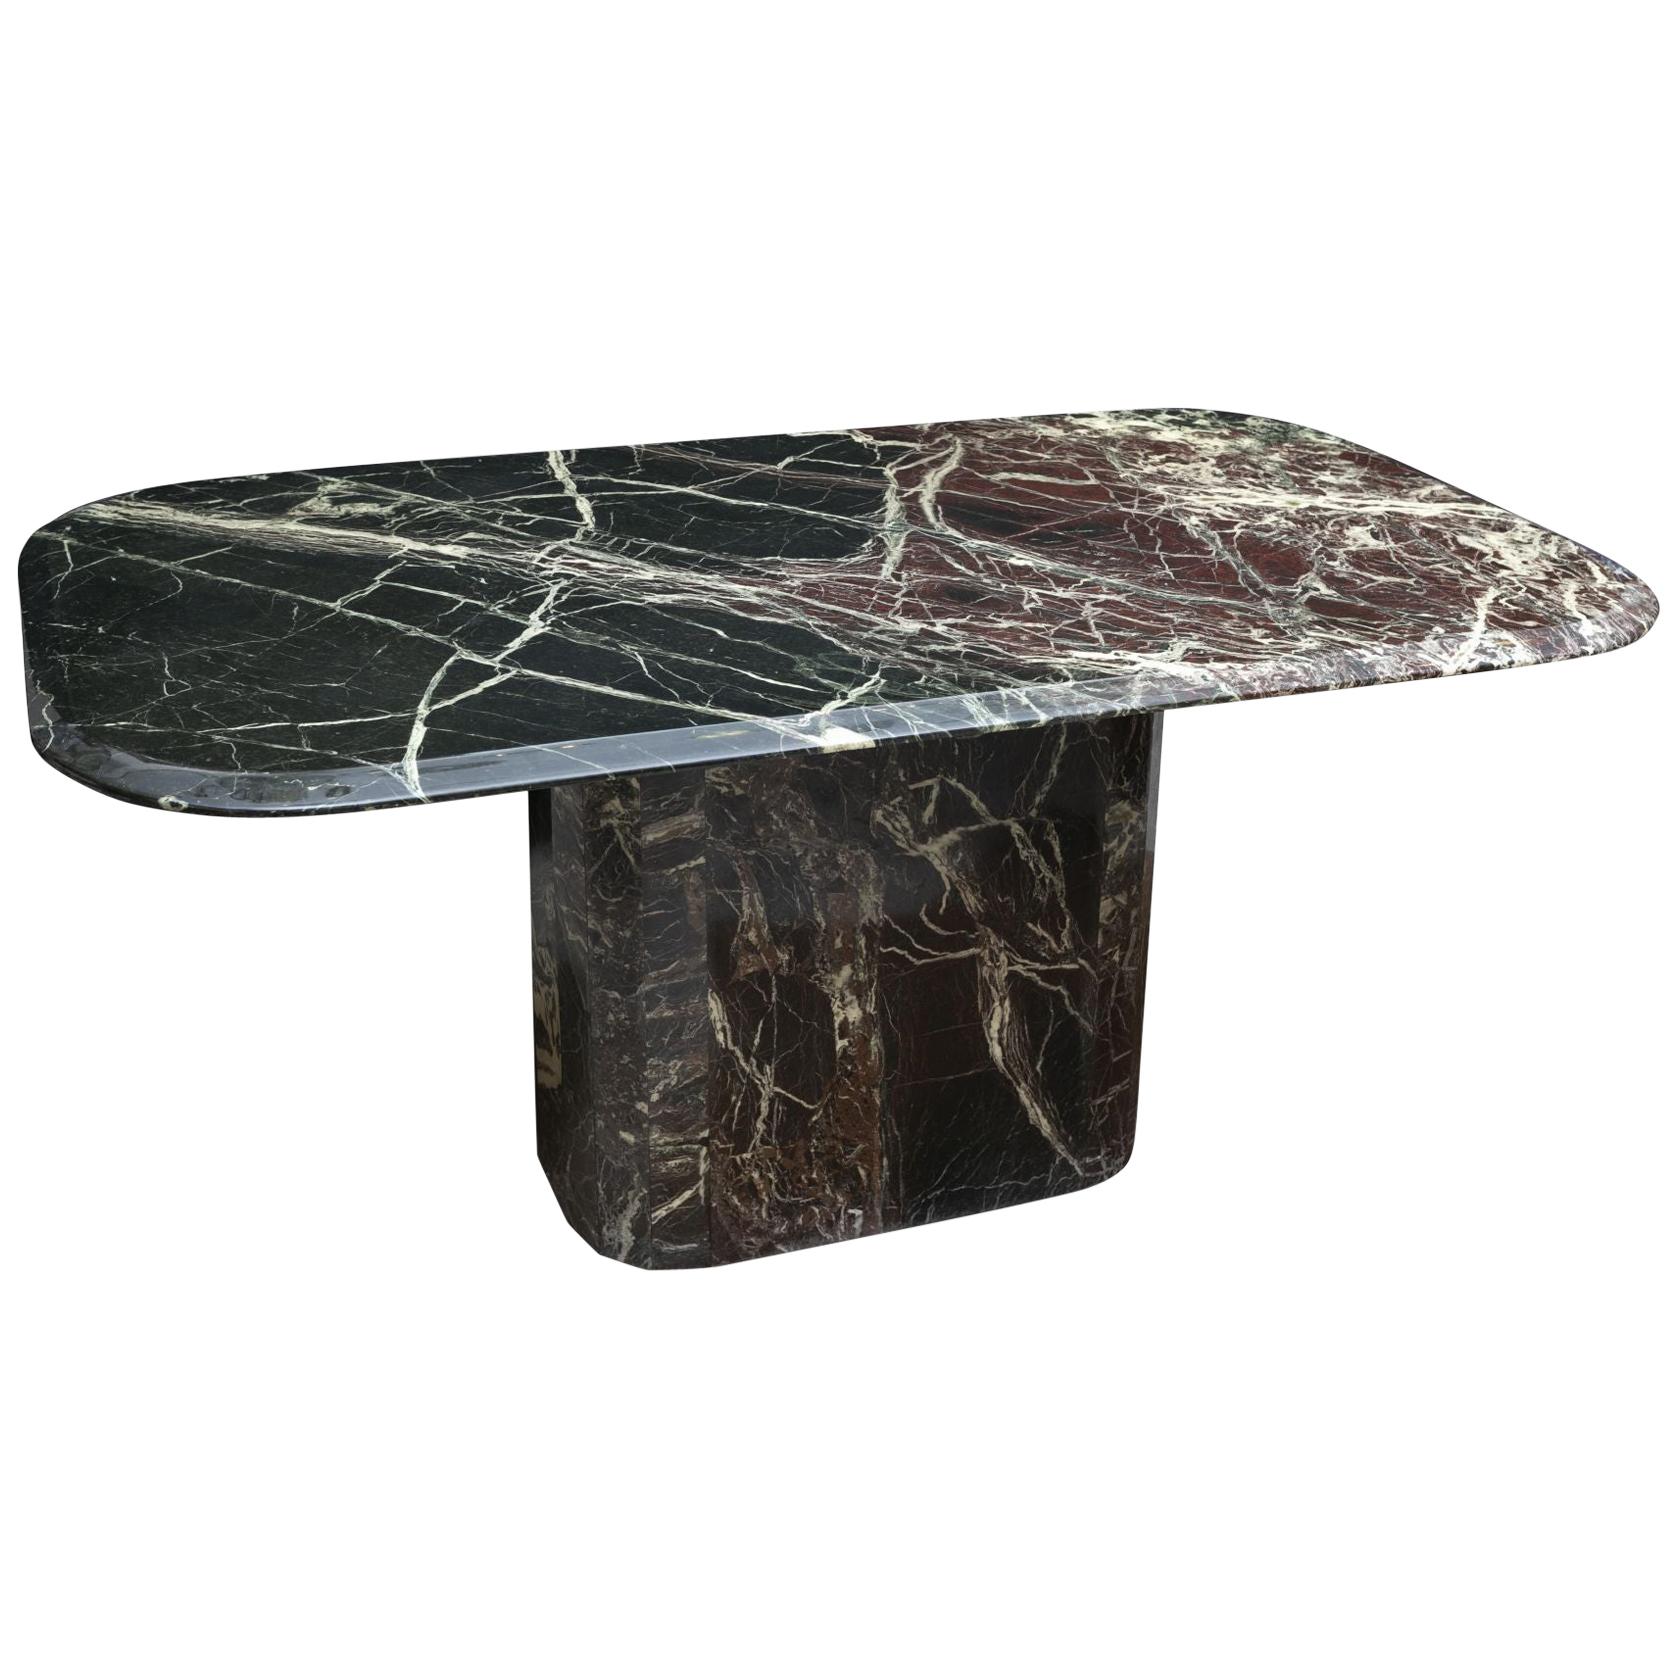 1970s Willy Rizzo for Roche Bobois Black, White and Burgondy Marble Dining Table